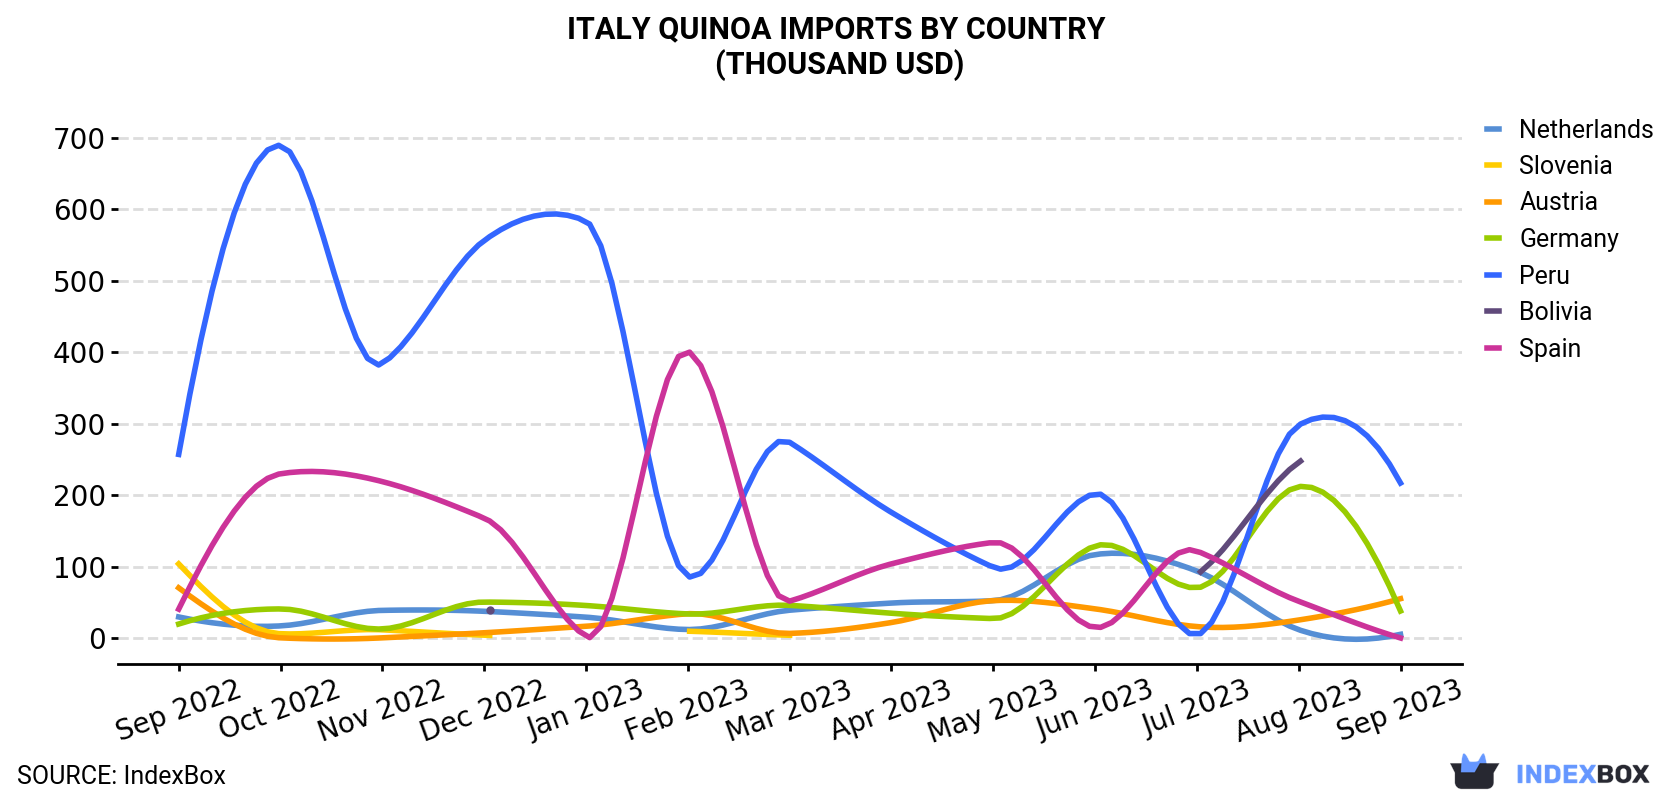 Italy Quinoa Imports By Country (Thousand USD)